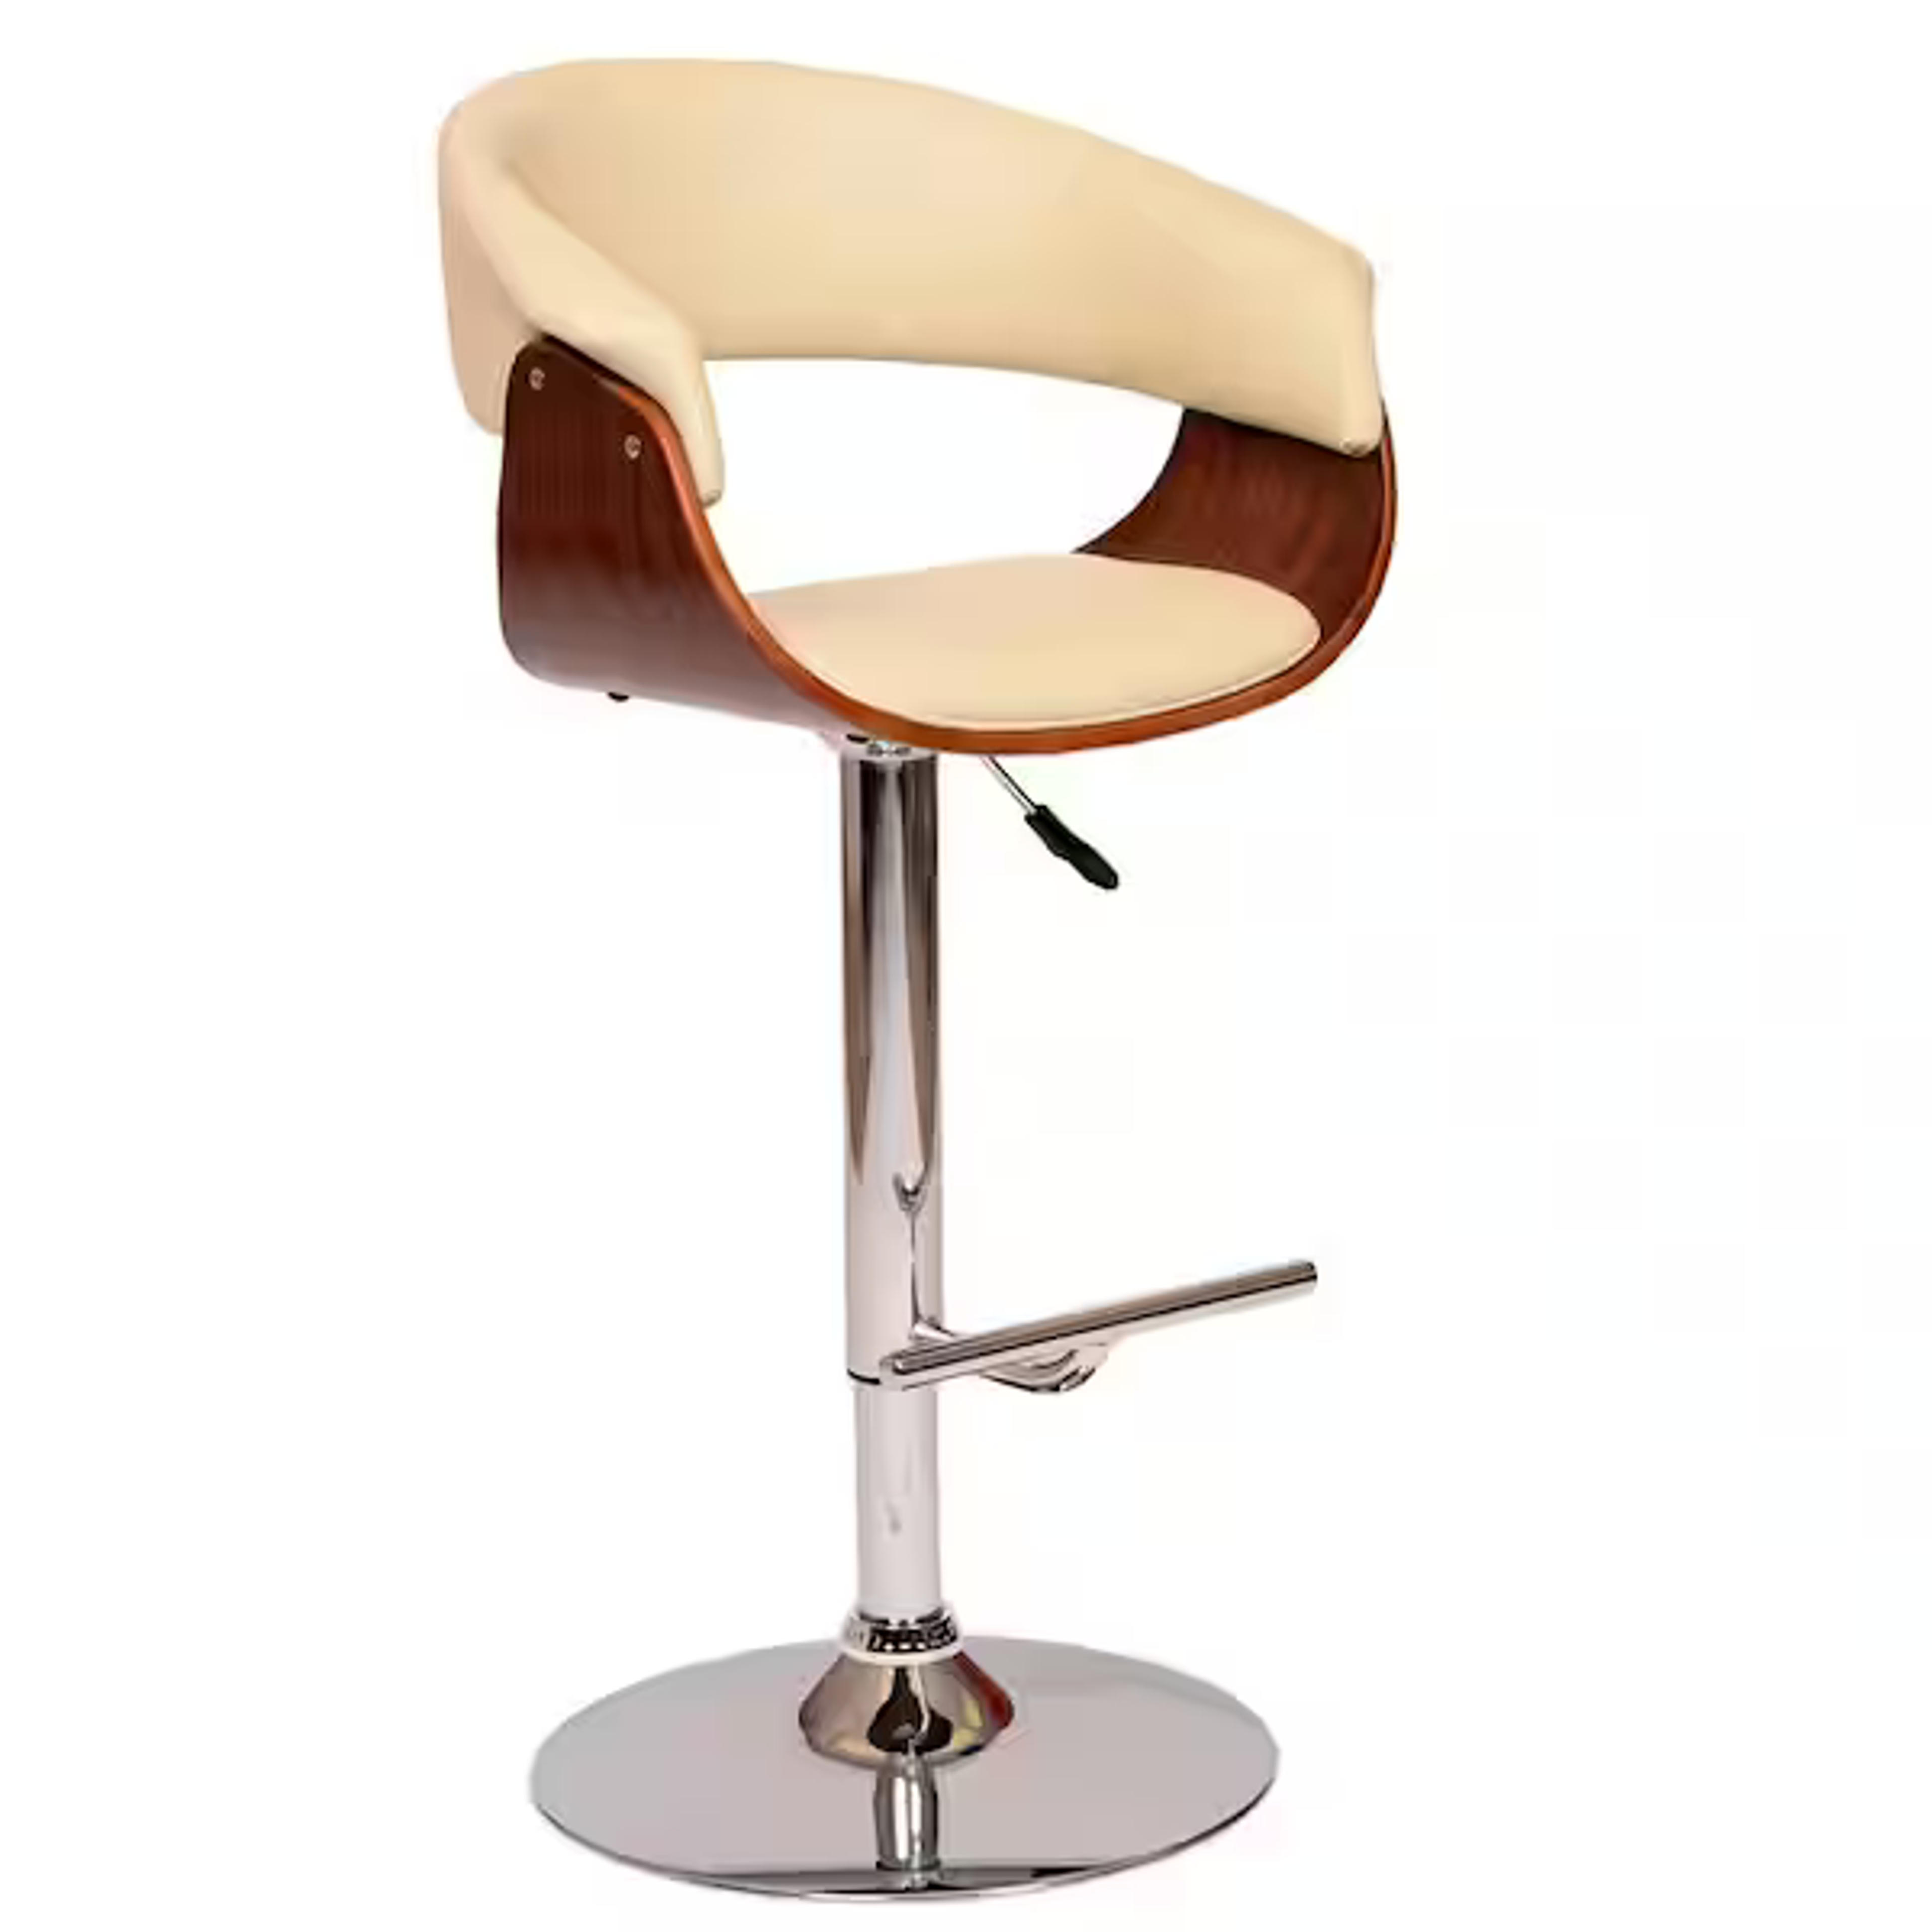 Paris 36-44 in. Cream Faux Leather and Chrome Finish Adjustable Swivel Bar Stool